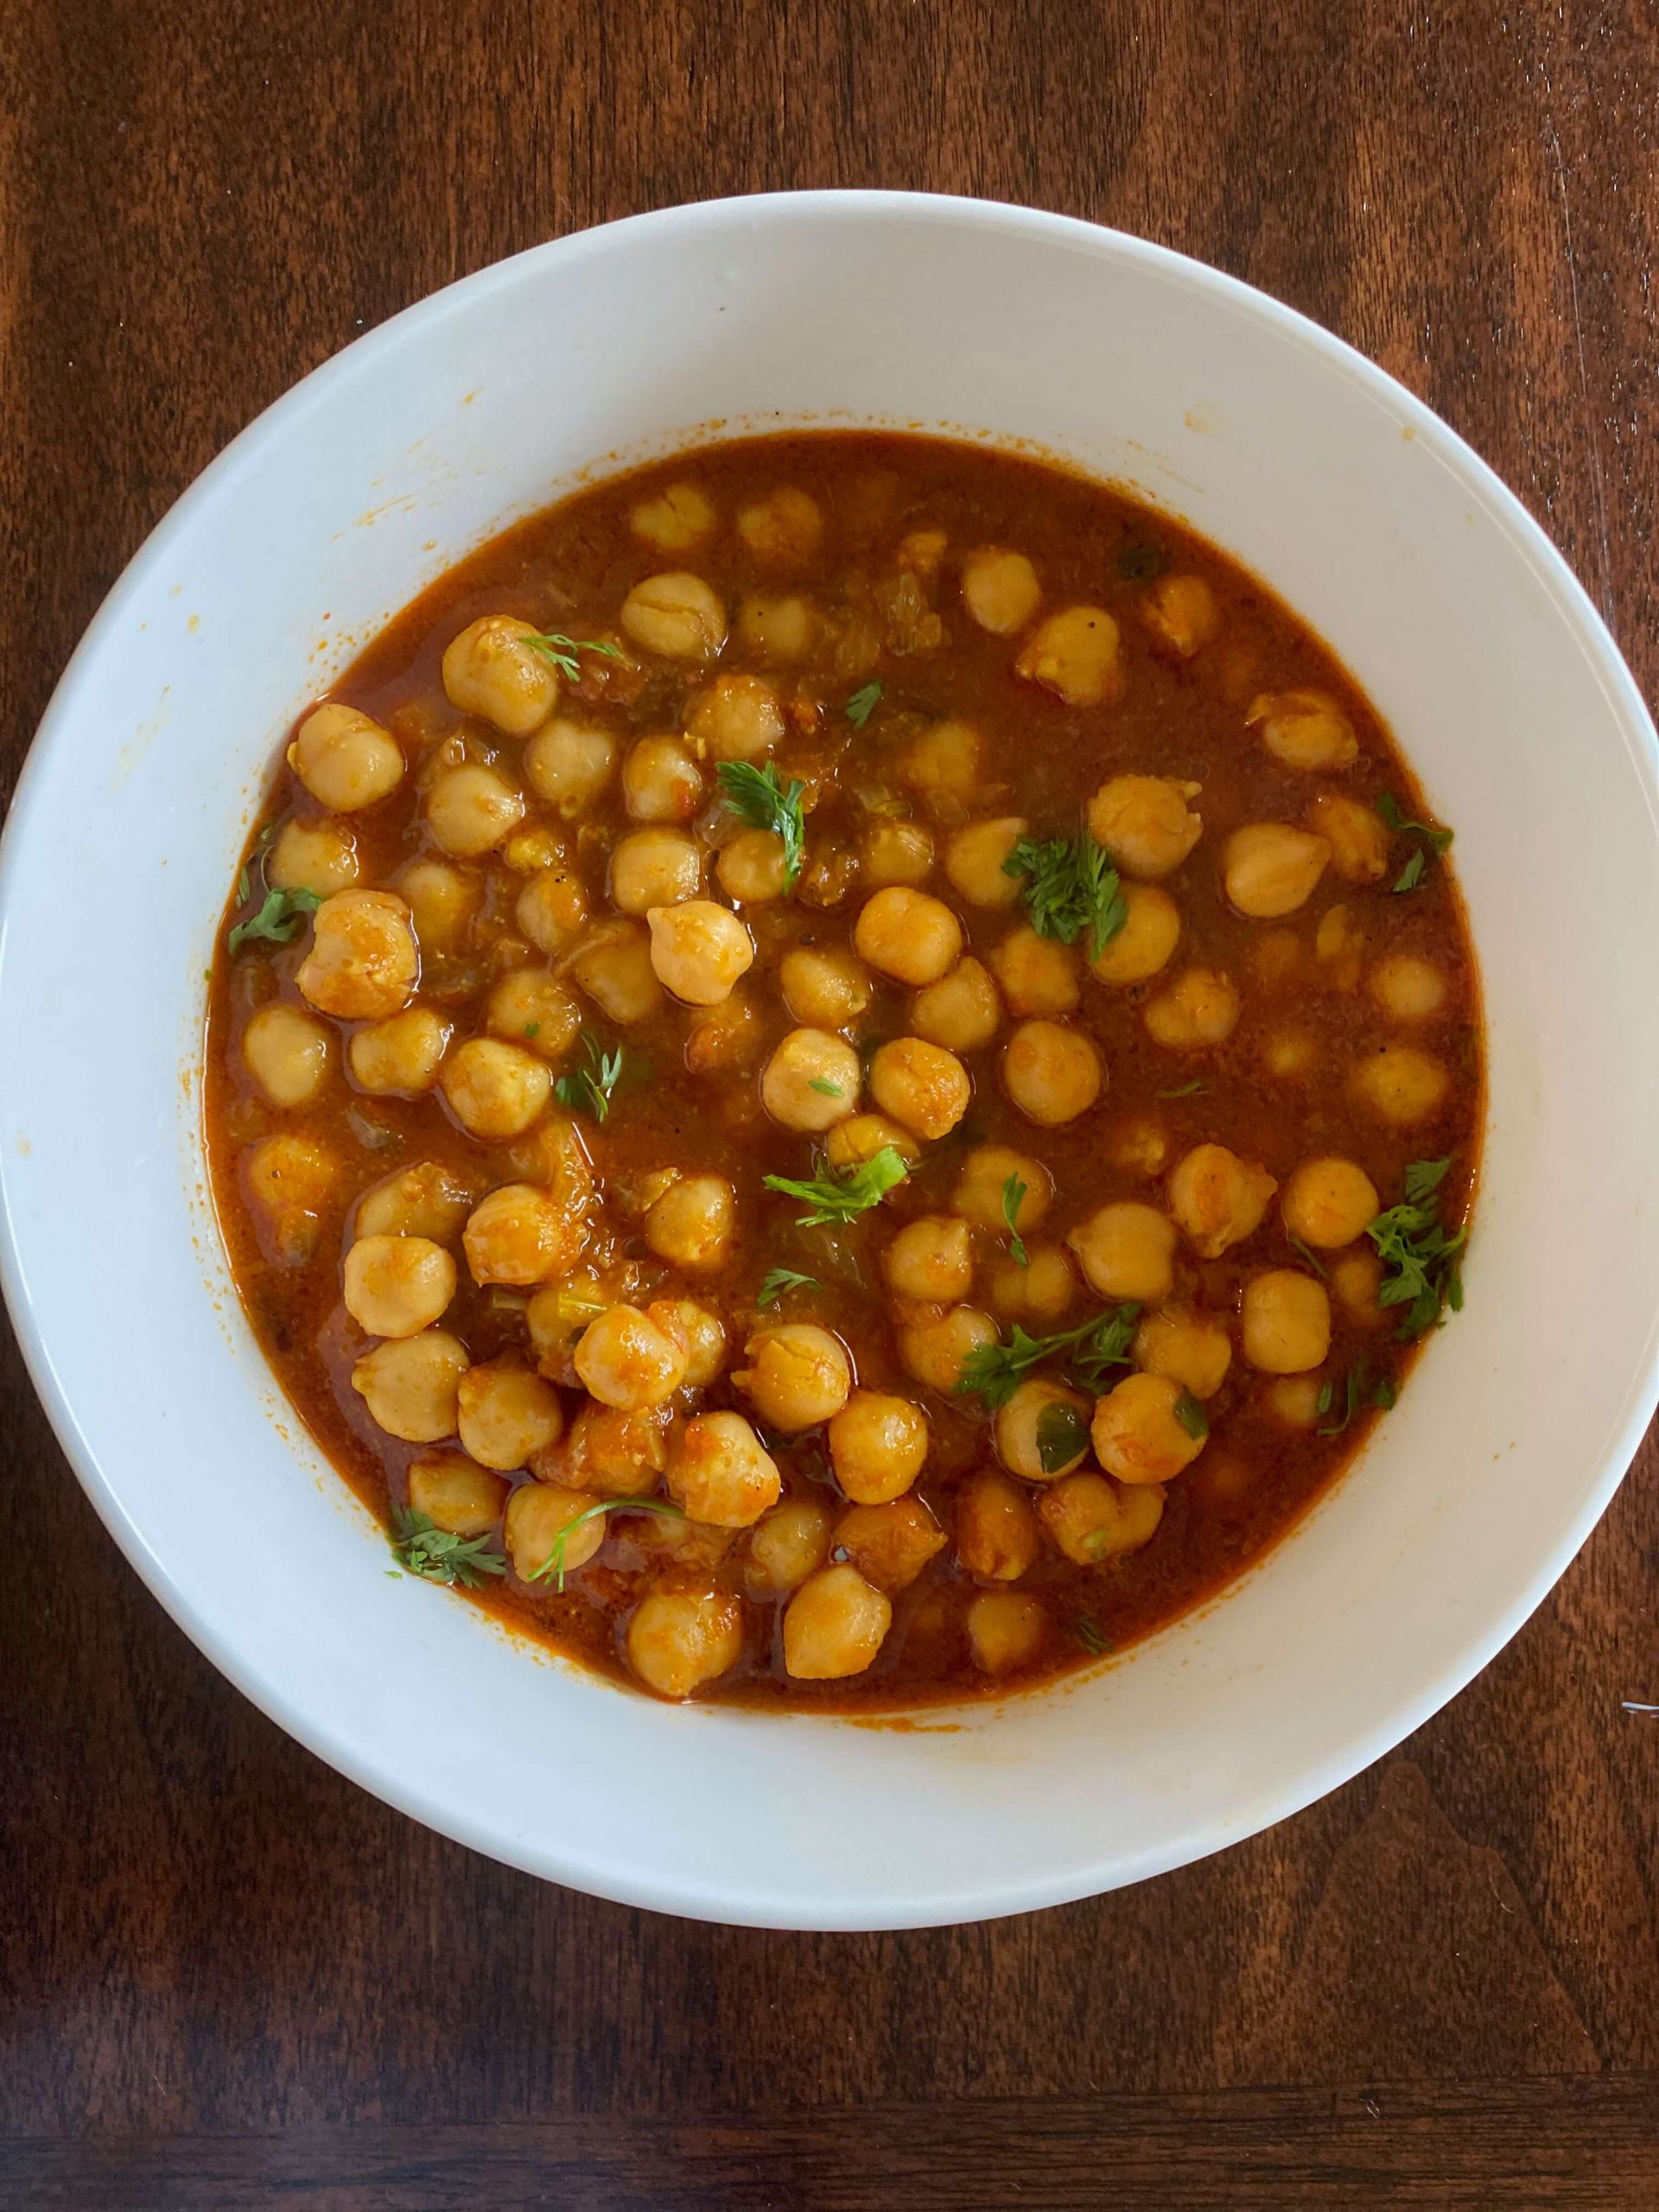 Chickpea Masala - Love to stay home